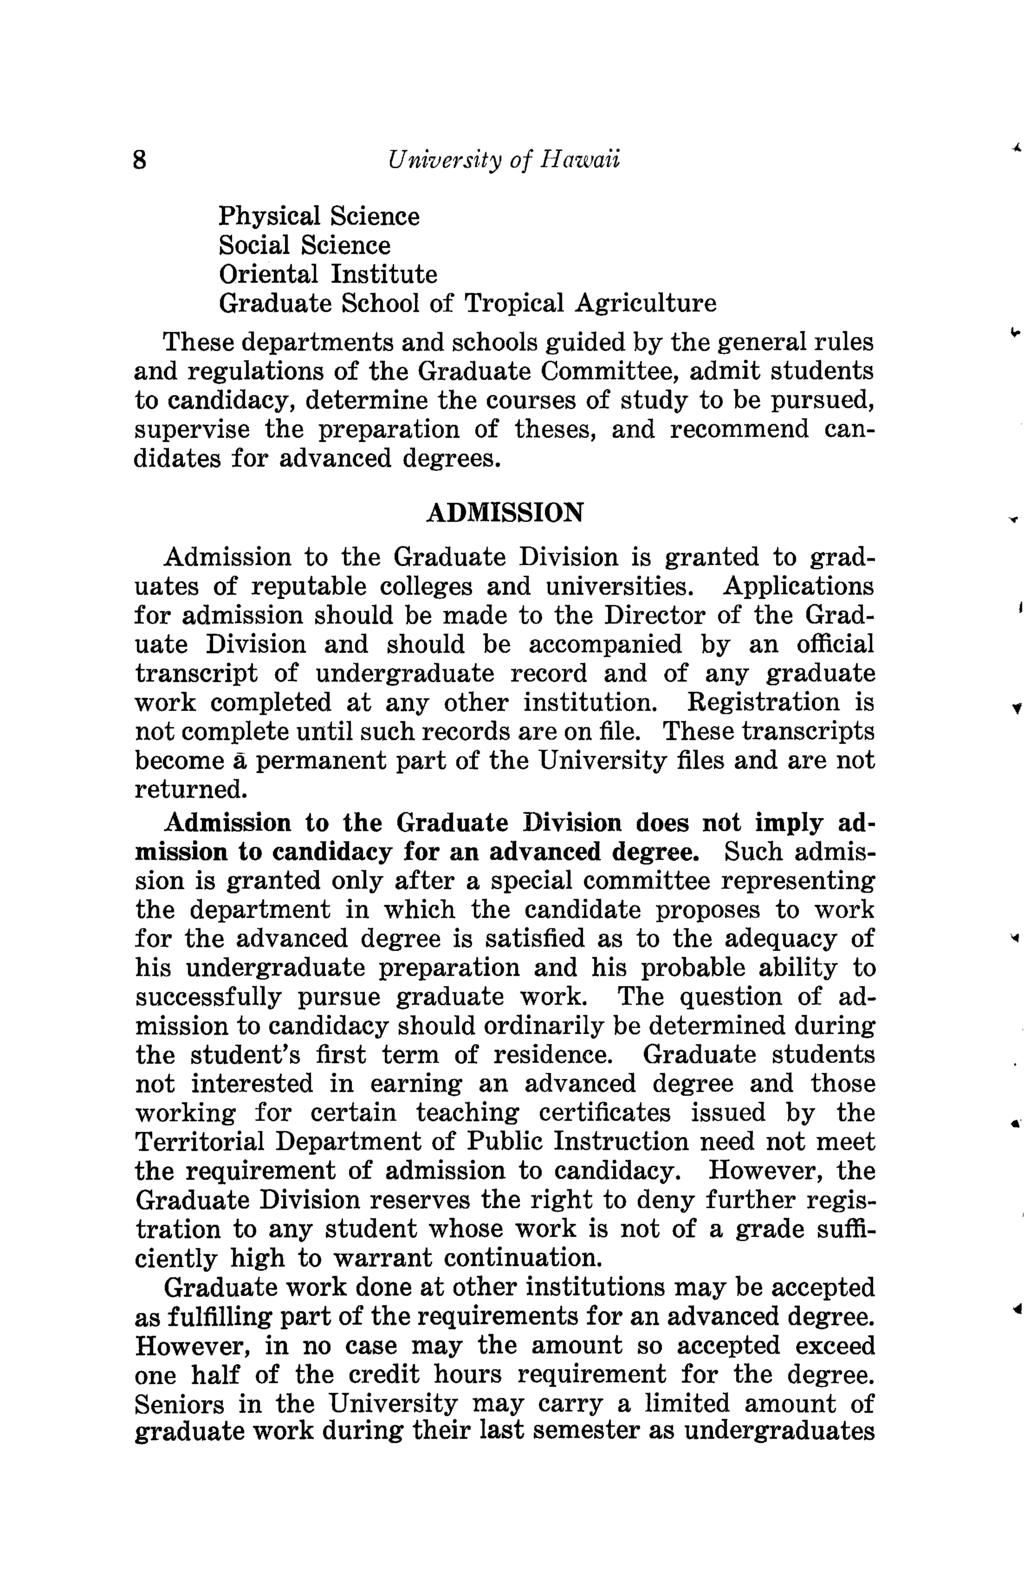 8 University of Hawaii Physical Science Social Science Oriental Institute Graduate School of Tropical Agriculture These departments and schools guided by the general rules and regulations of the